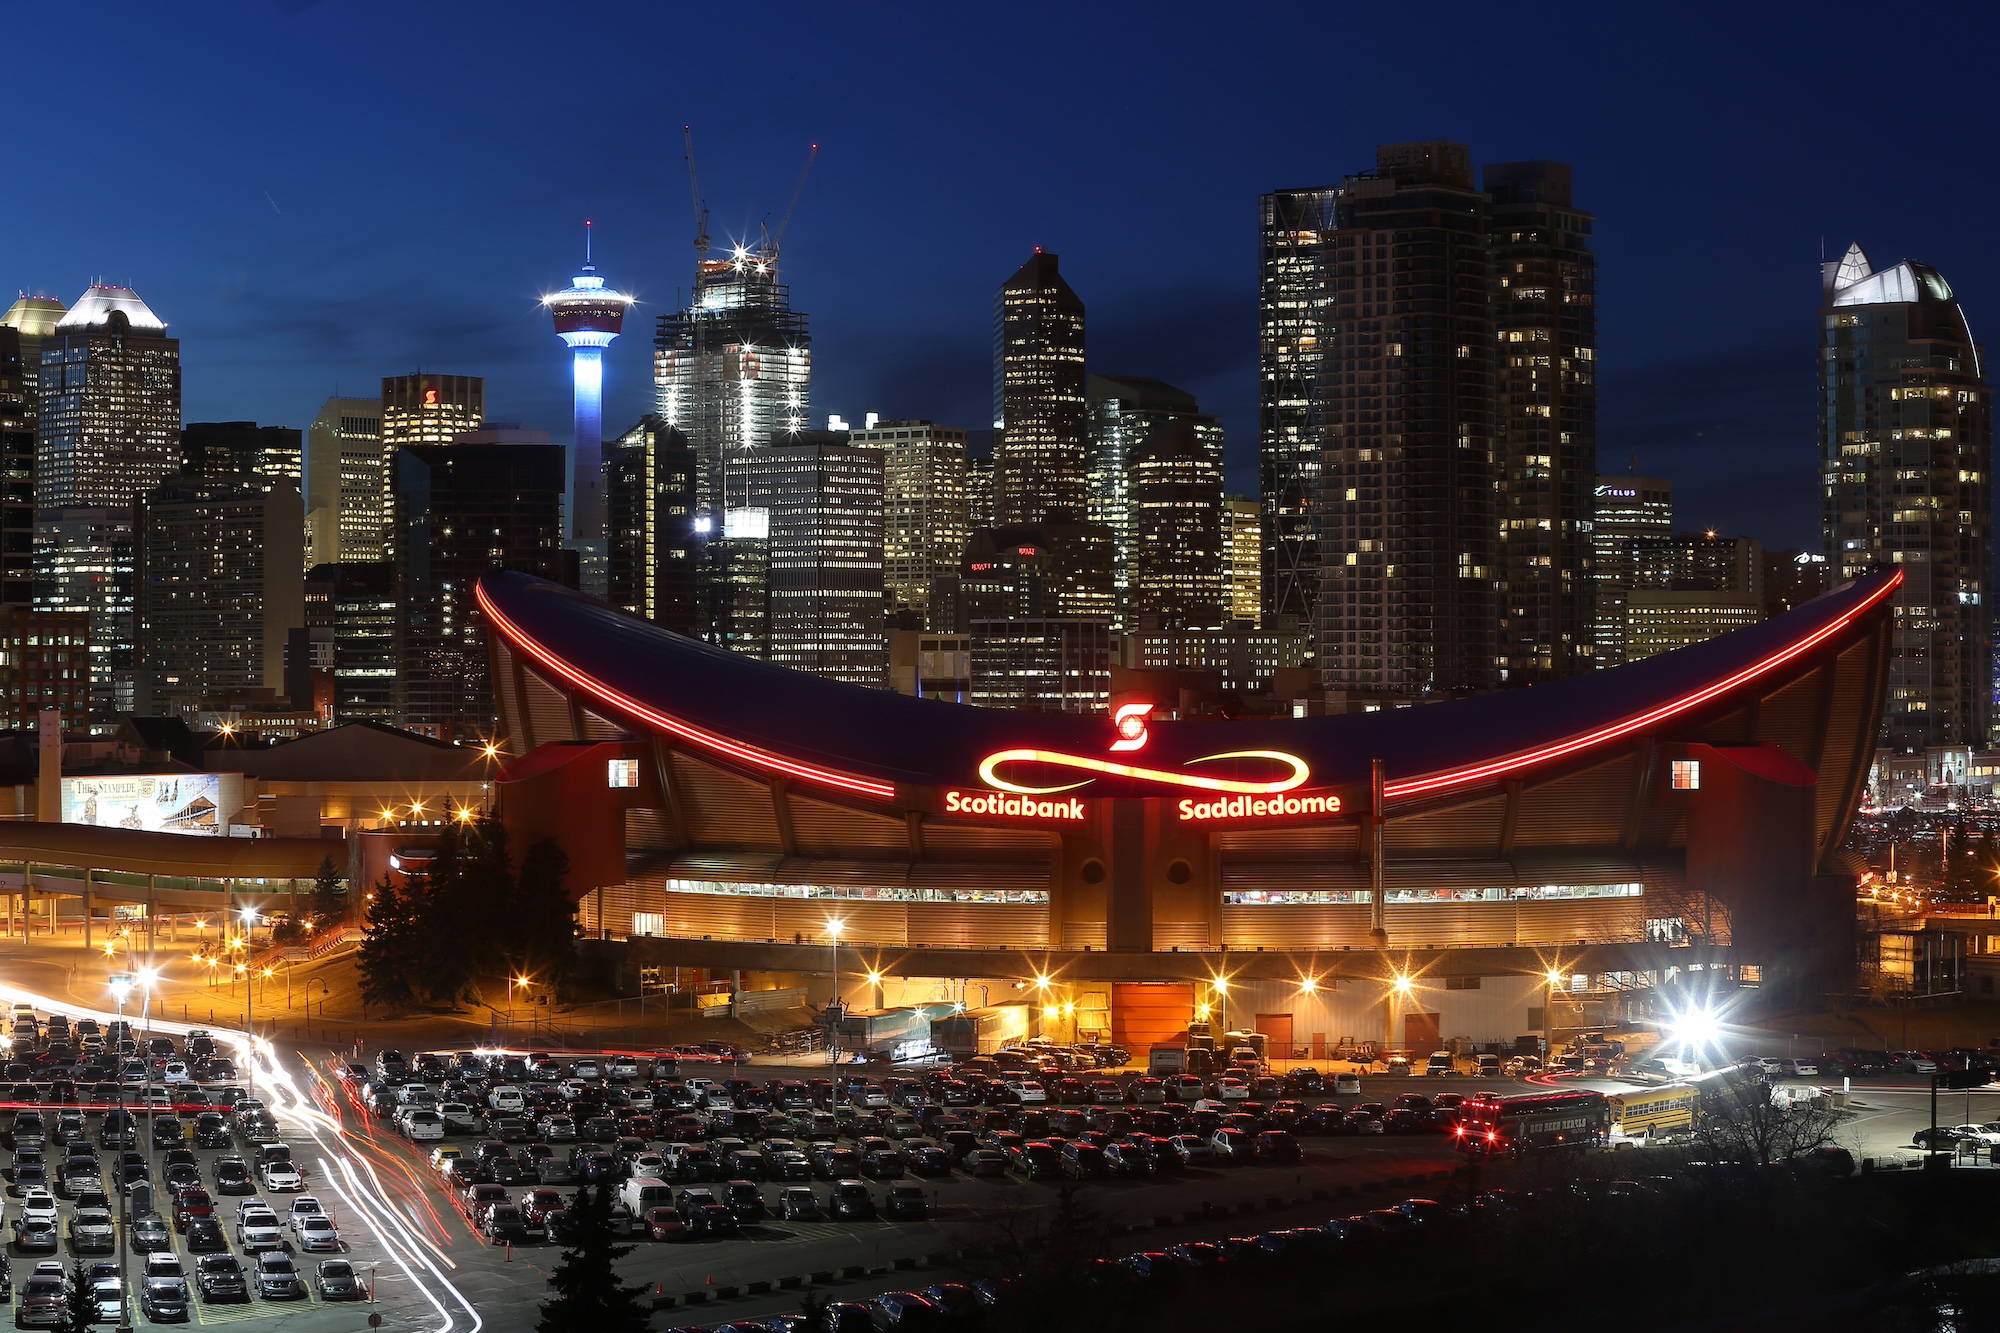 CALGARY, CANADA - FEBRUARY 25: A view of the exterior of the Scotiabank Saddledome home of the NHL’s Calgary Flames with the city skyline in the background on February 25, 2016 in Calgary, Alberta. (Photo by Tom Szczerbowski/Getty Images) *** Local Caption ***